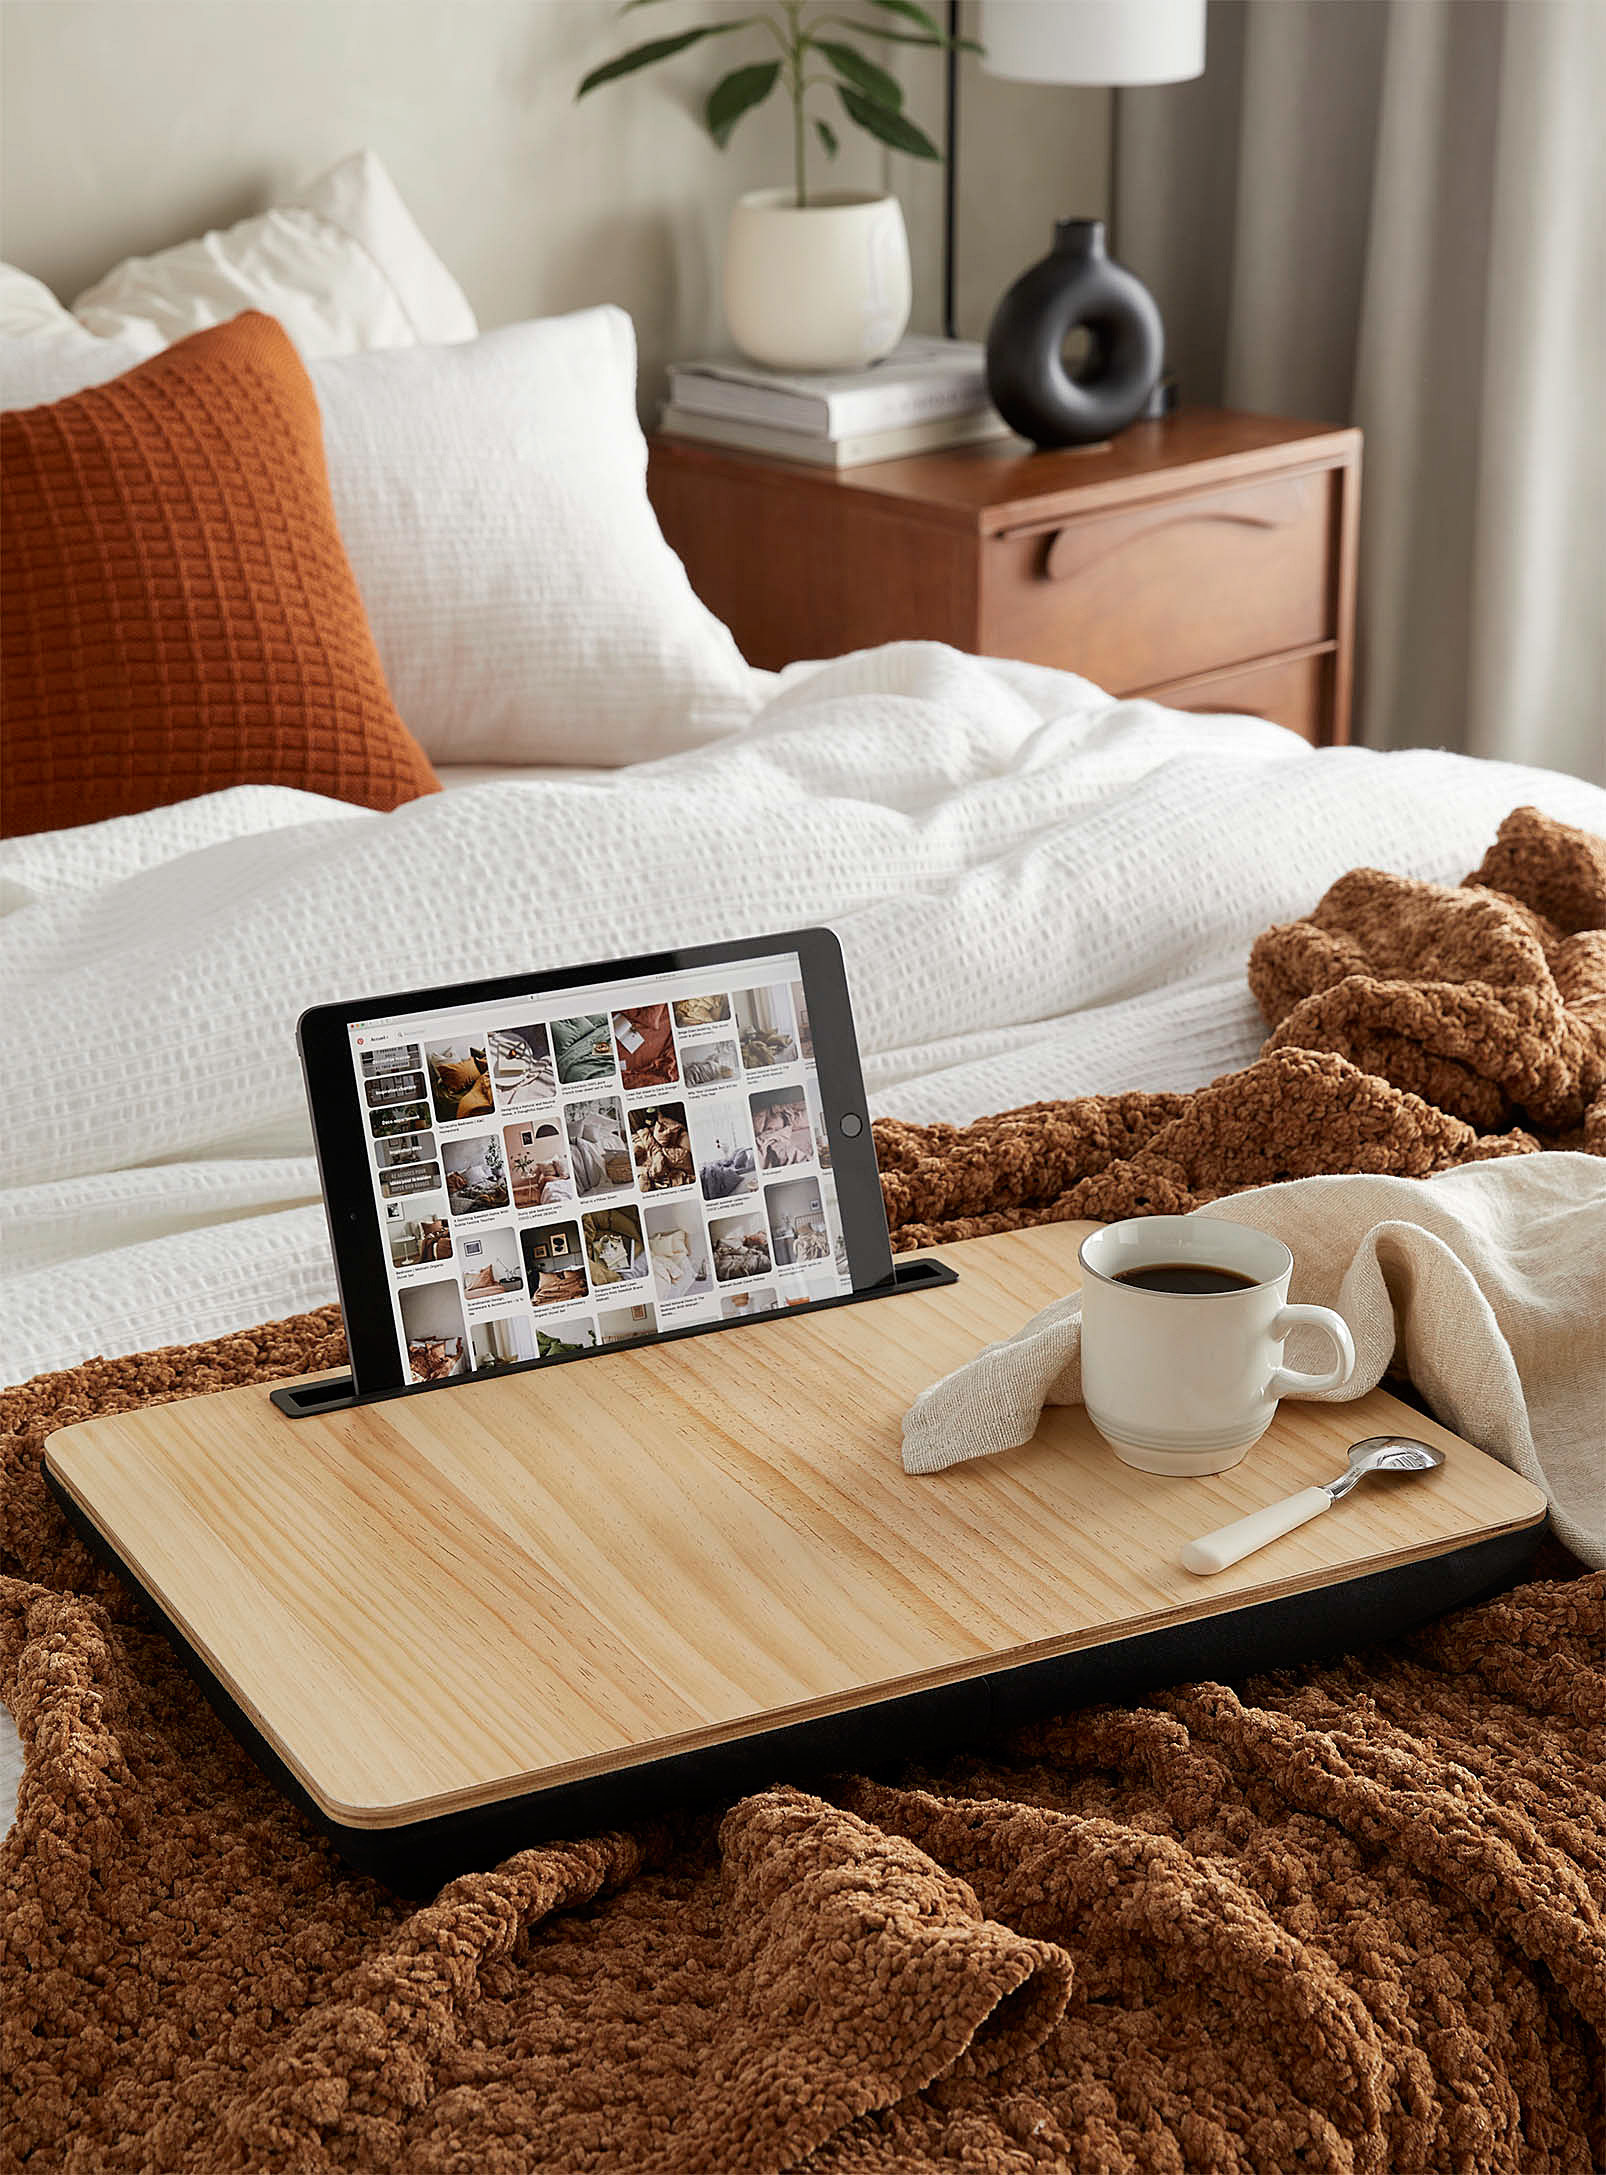 A wooden tray with a tablet on it placed on a bed